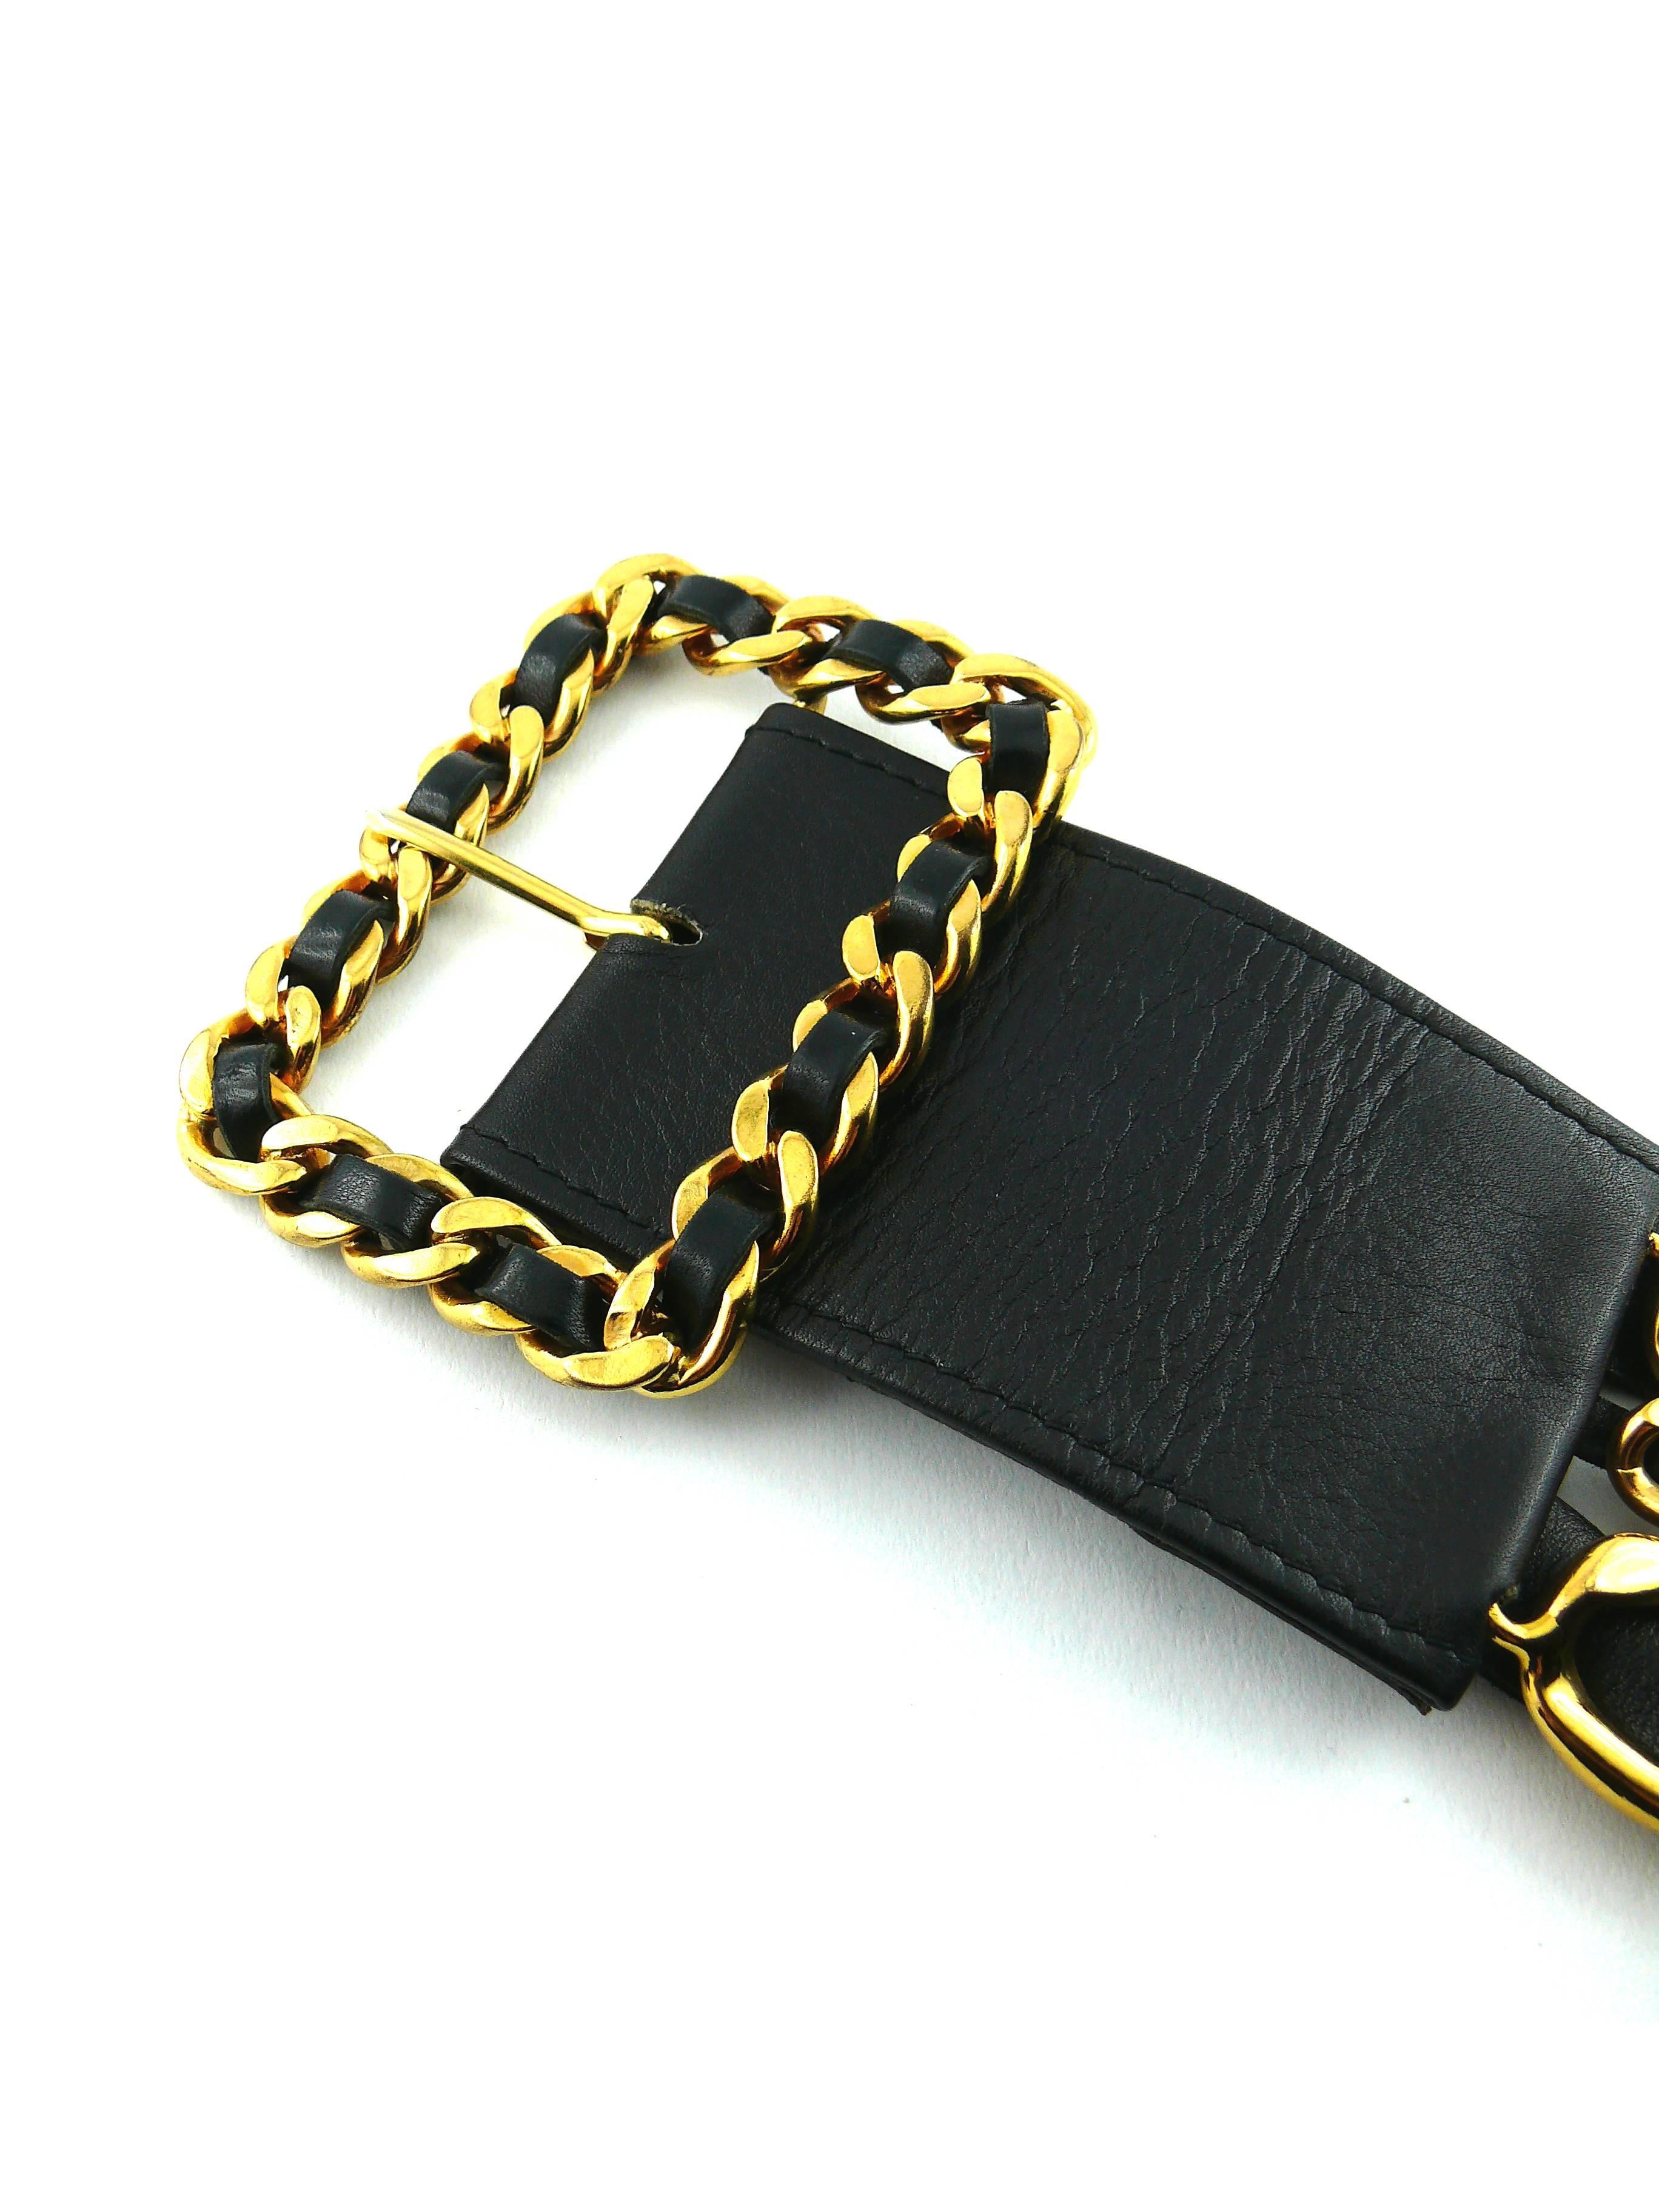 Chanel Vintage Large Iconic Chain and Woven Leather Belt 1